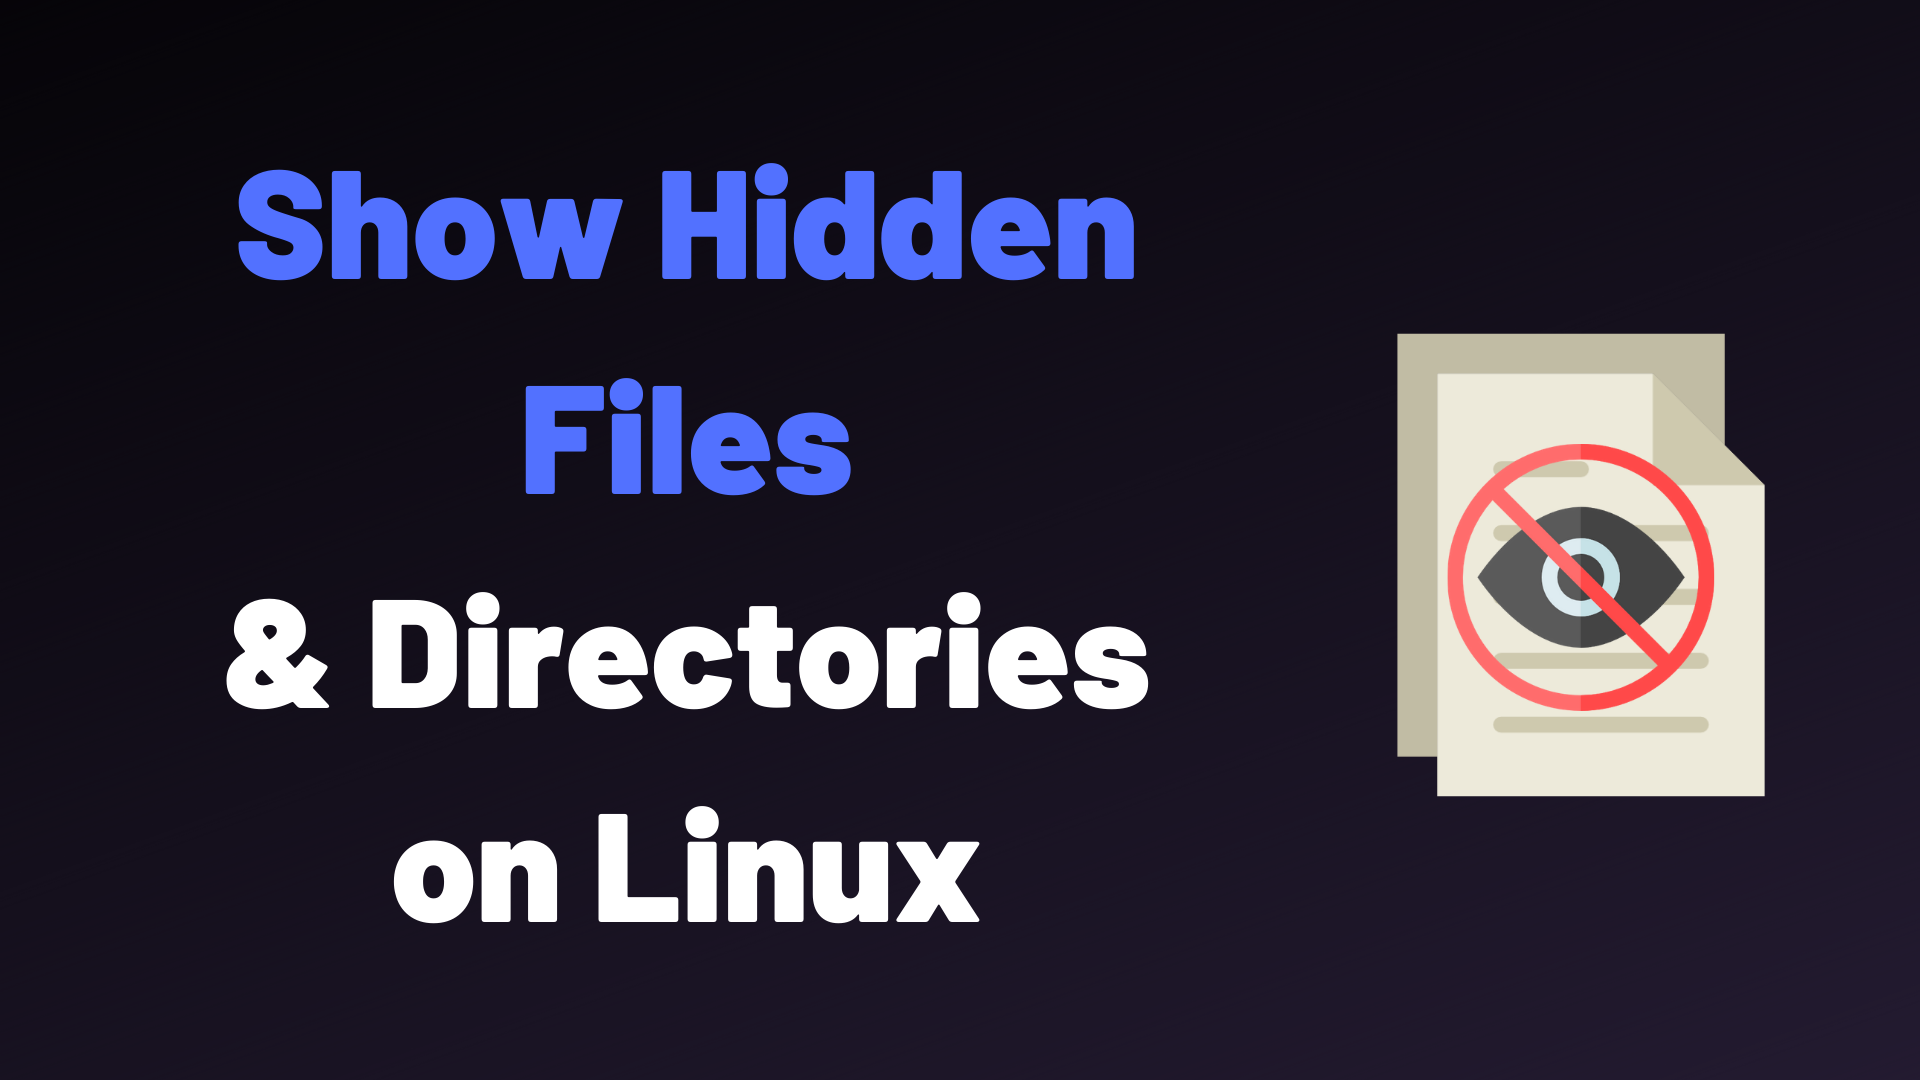 How To Show Hidden Files on Linux